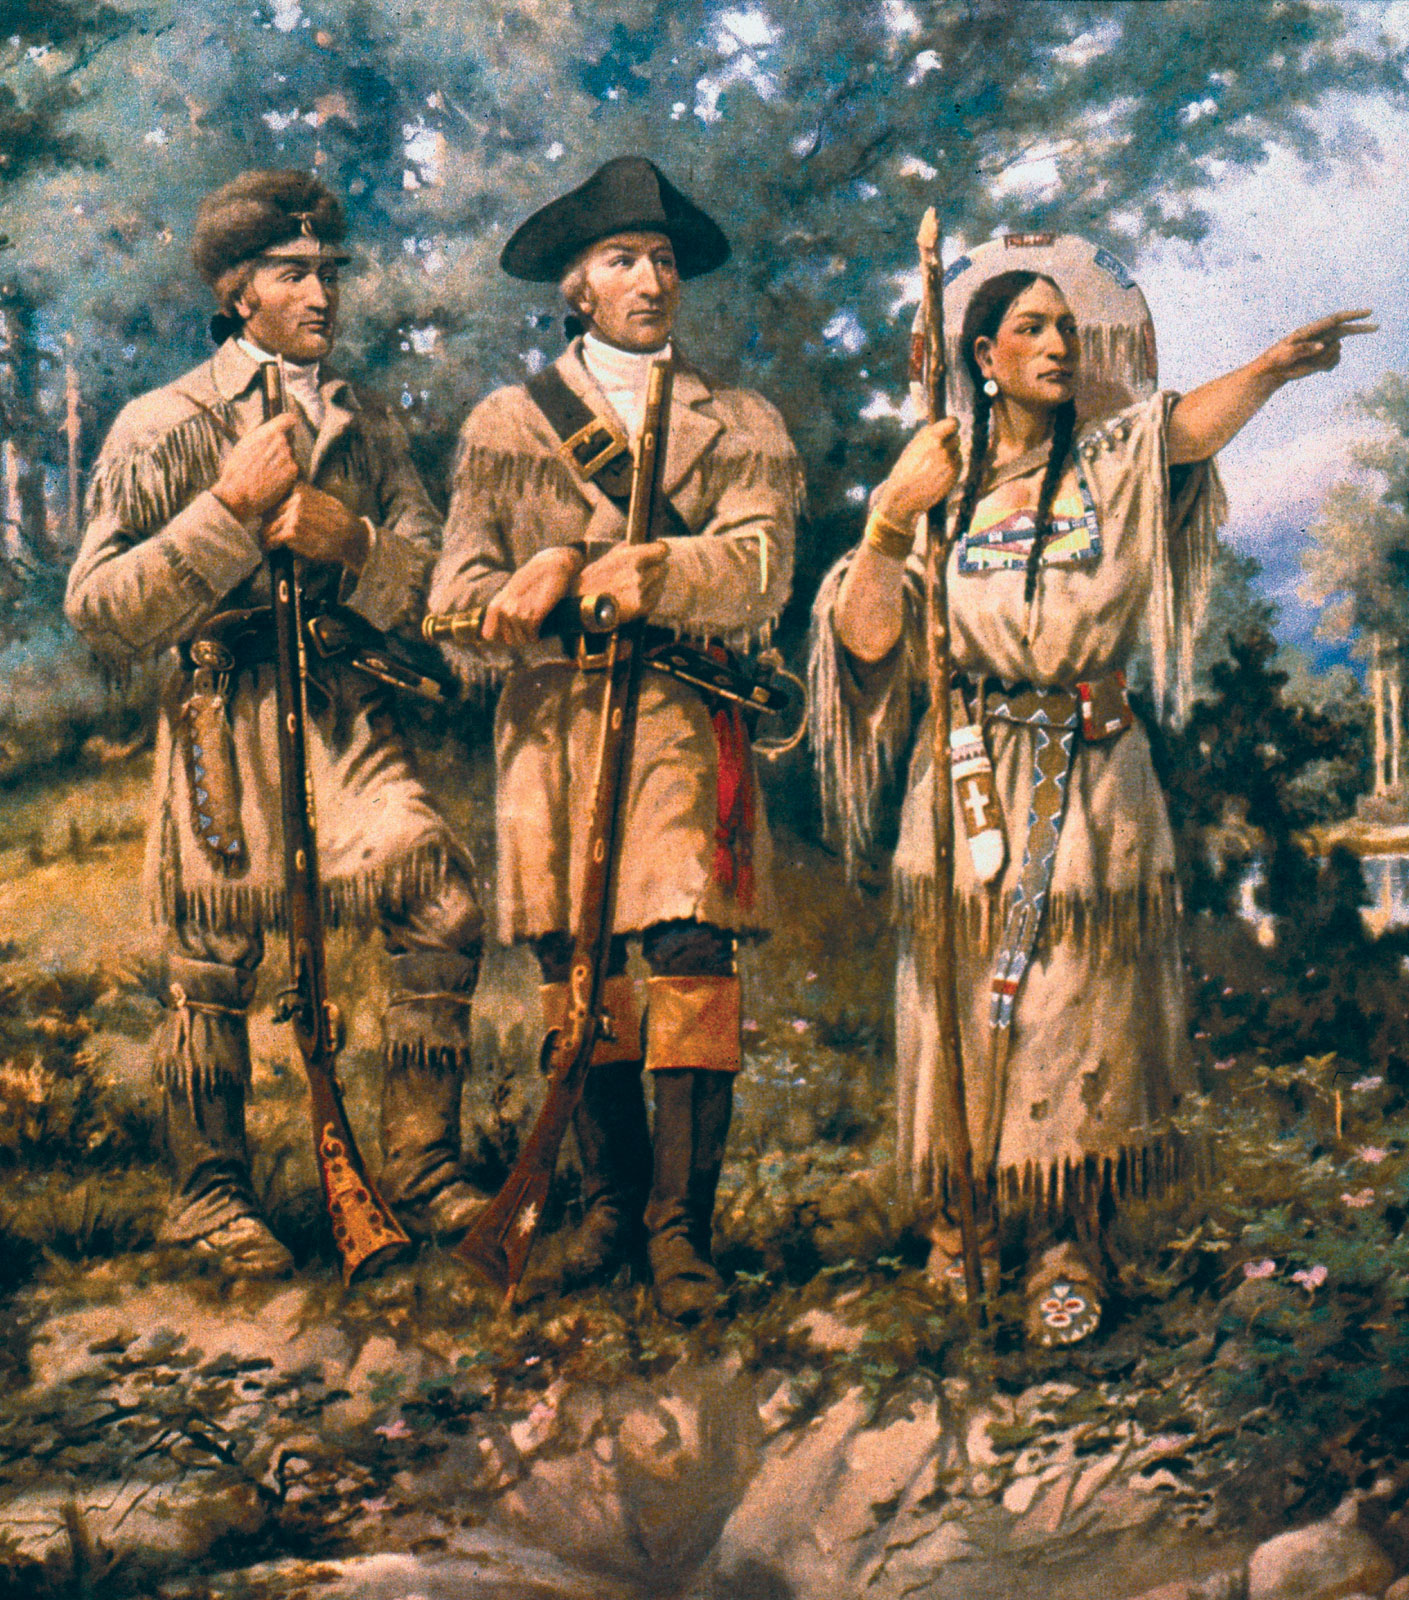 In their exploration of the Western United States in 1804, Lewis and Clark were using Sacagawea as an interpreter with the native people as they traveled west. Before they crossed the Rocky Mountains, they had to secure horses for their journey across in order to survive. The local Indian tribe didnt trust Lewis and Clark and believed they might be a war party. As Sacagawea was interpreting and talking with the Indian chief and getting nowhere, she suddenly realized that the chief is actually her long lost brother and breaks down hysterical crying. She was taken as a slave from a neighboring tribe at a very young age. It completely changed the direction of the talks and Lewis and Clarks party of 40 people got their horses